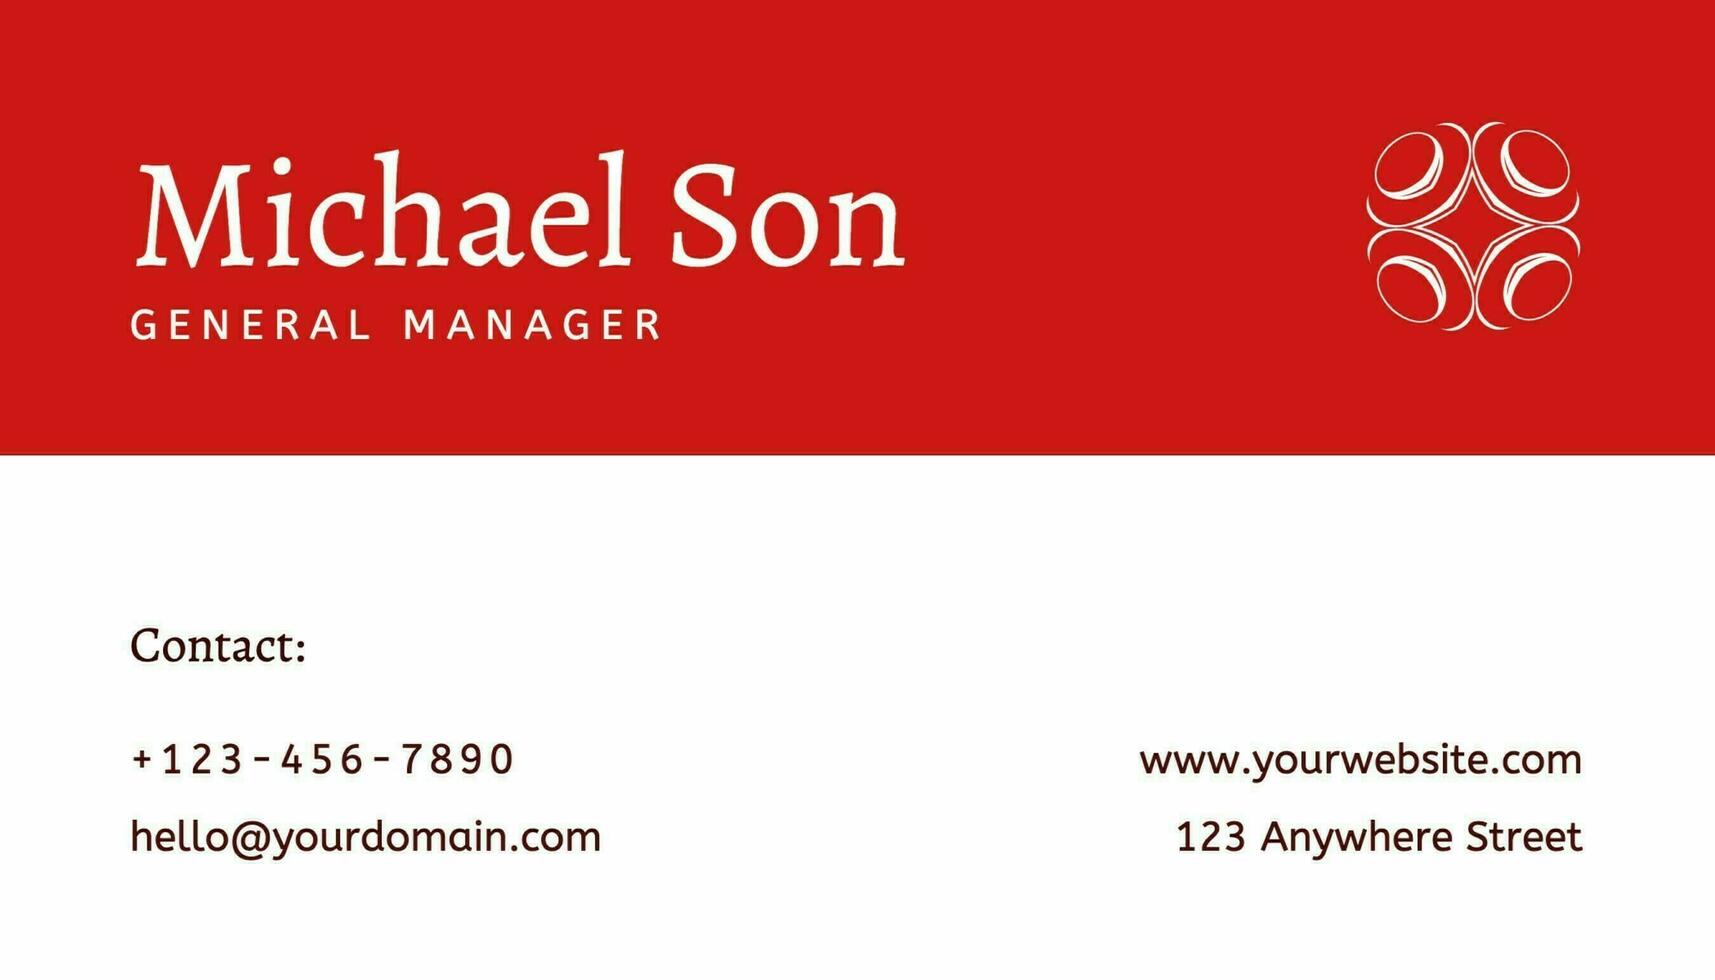 Red Elegant General Manager Business Card template